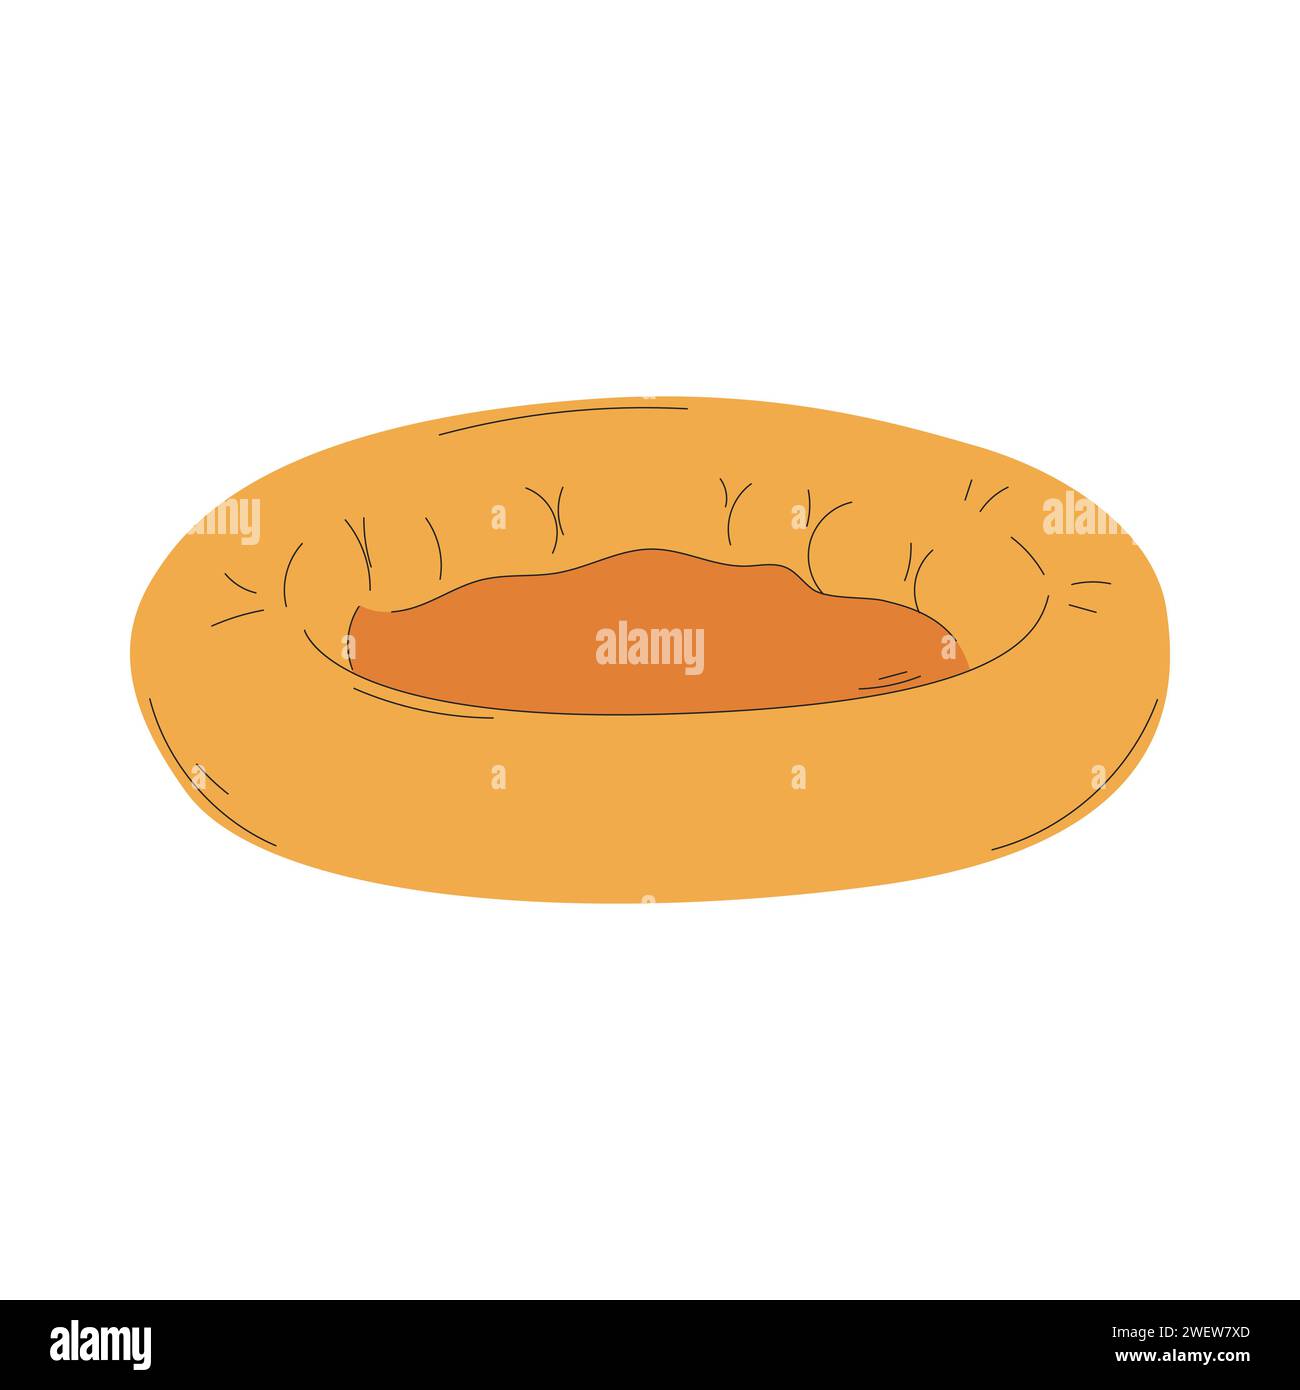 A bed for cats or dogs. A place for a pet to sleep. A pet care item. A flat vector illustration isolated on a white background Stock Vector